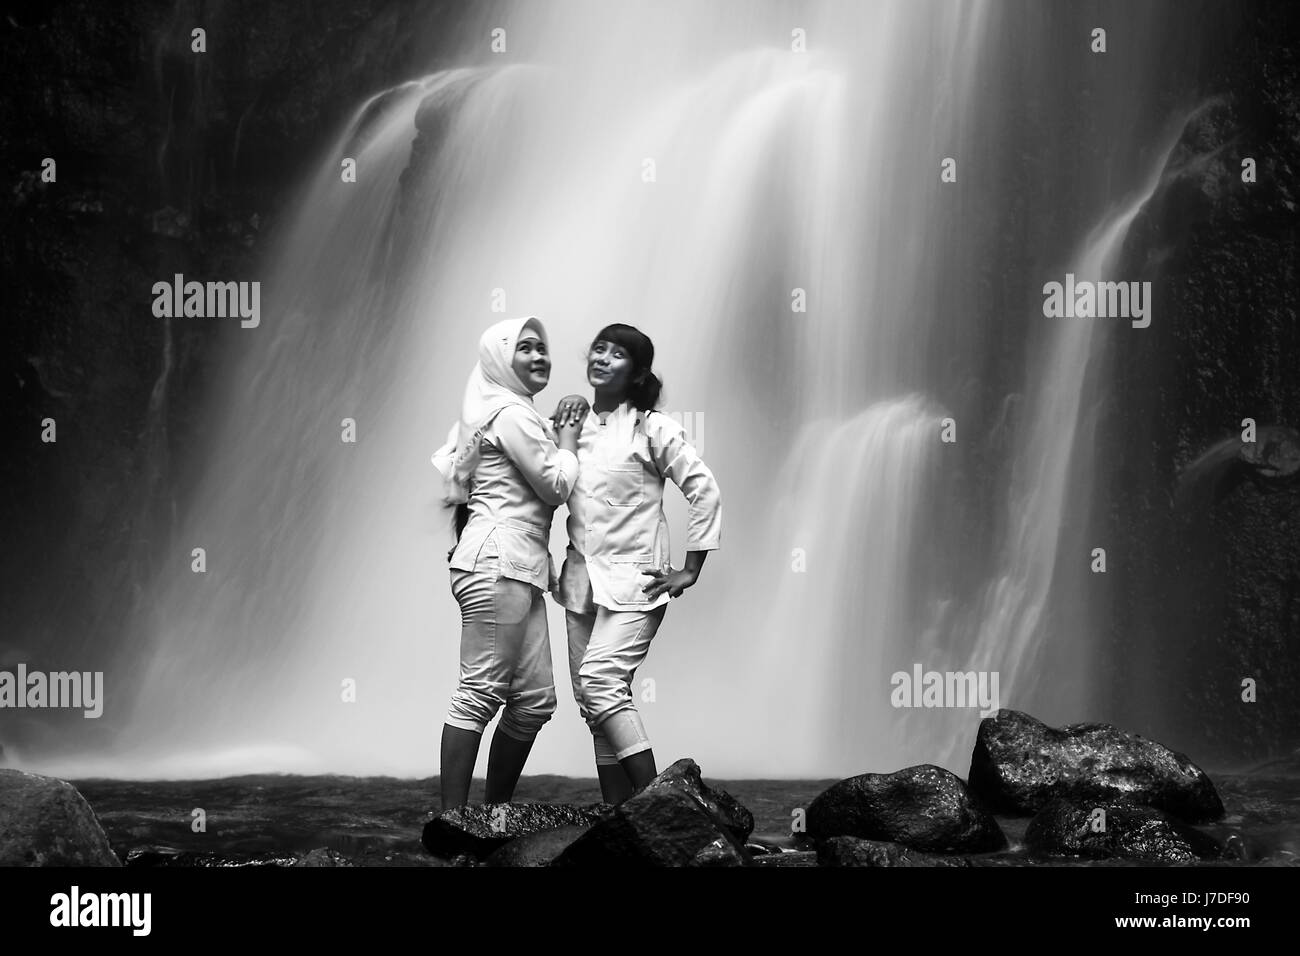 Girls posing at surreal waterfall for black and white portrait photo with ethereal silky smooth waterfall in the background. Dramatic long exposure Stock Photo